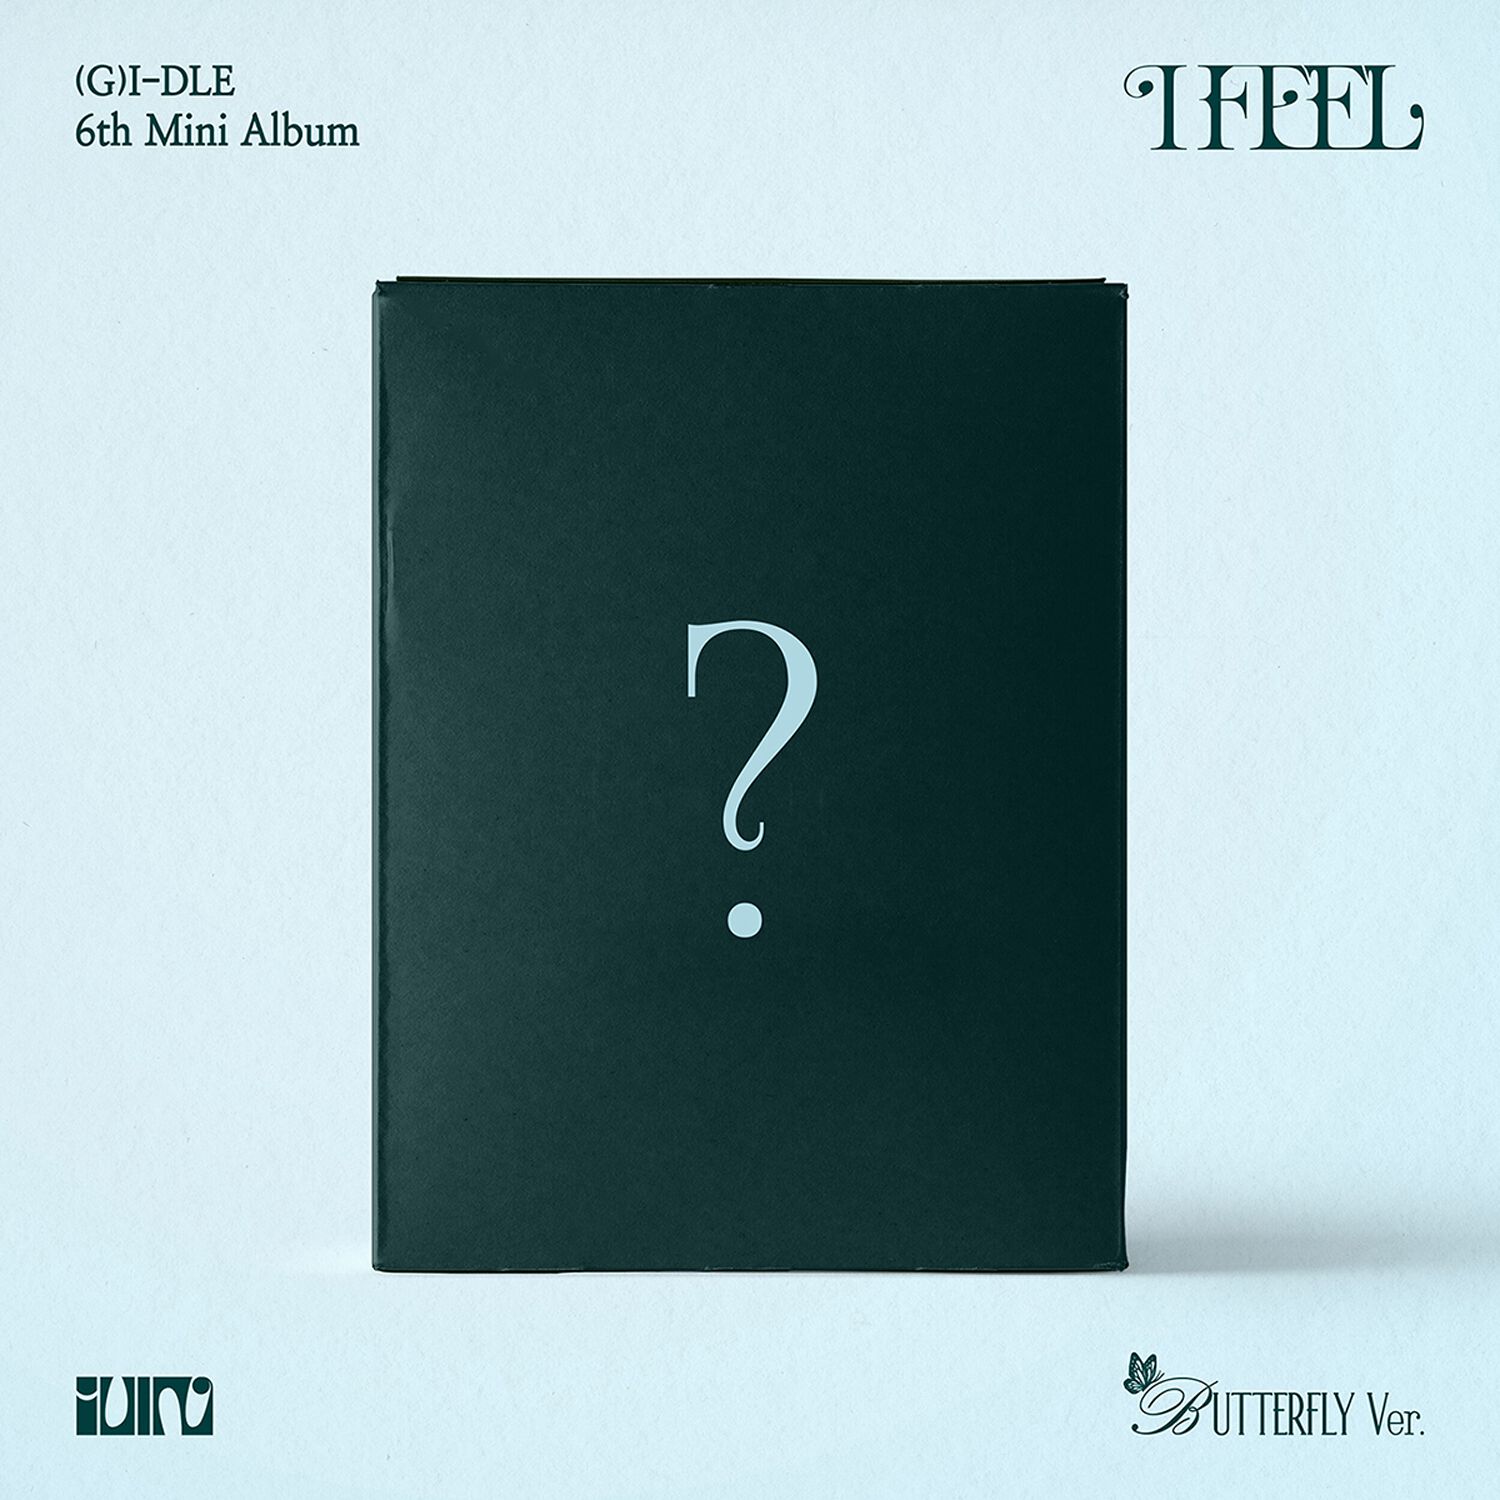 I FEEL (Butterfly Version) (Deluxe Box Set 2) CD von (G) I-DLE